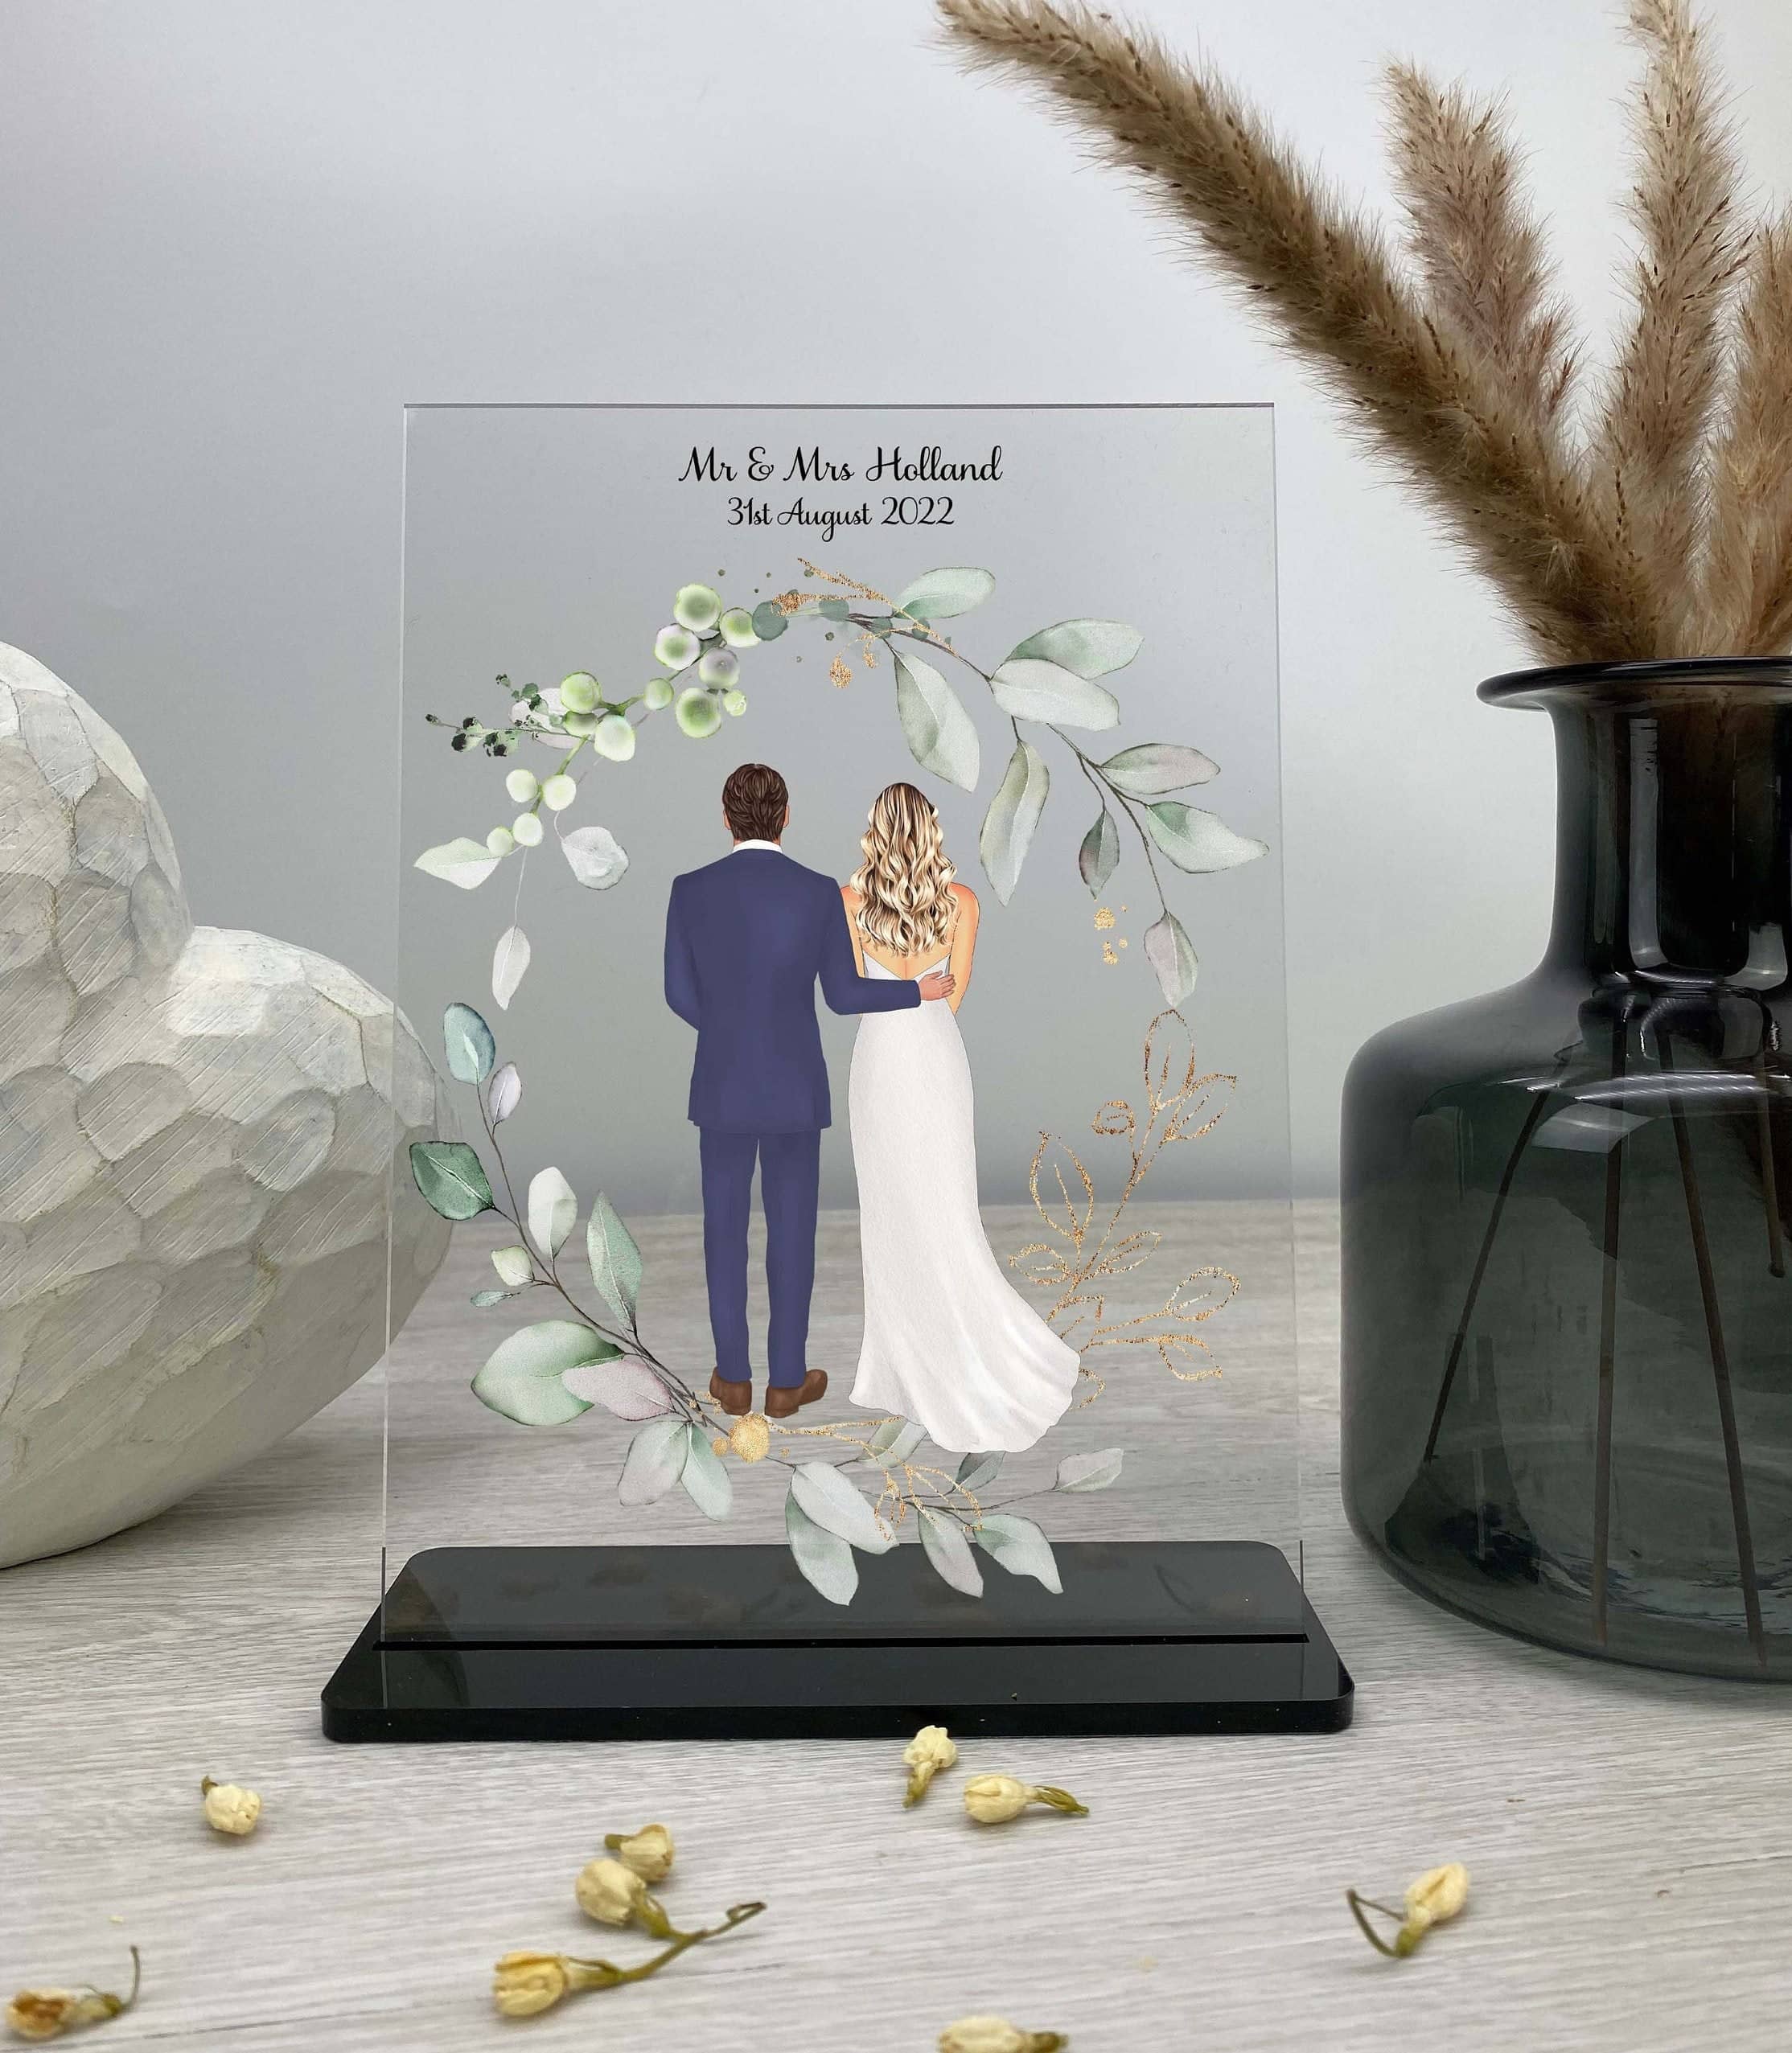 Personalised Wedding Gift, Bride and Groom Print, Couple Anniversary Gift, Birthday Gift for Her/Him, Custom Wedding Present, Acrylic Plaque